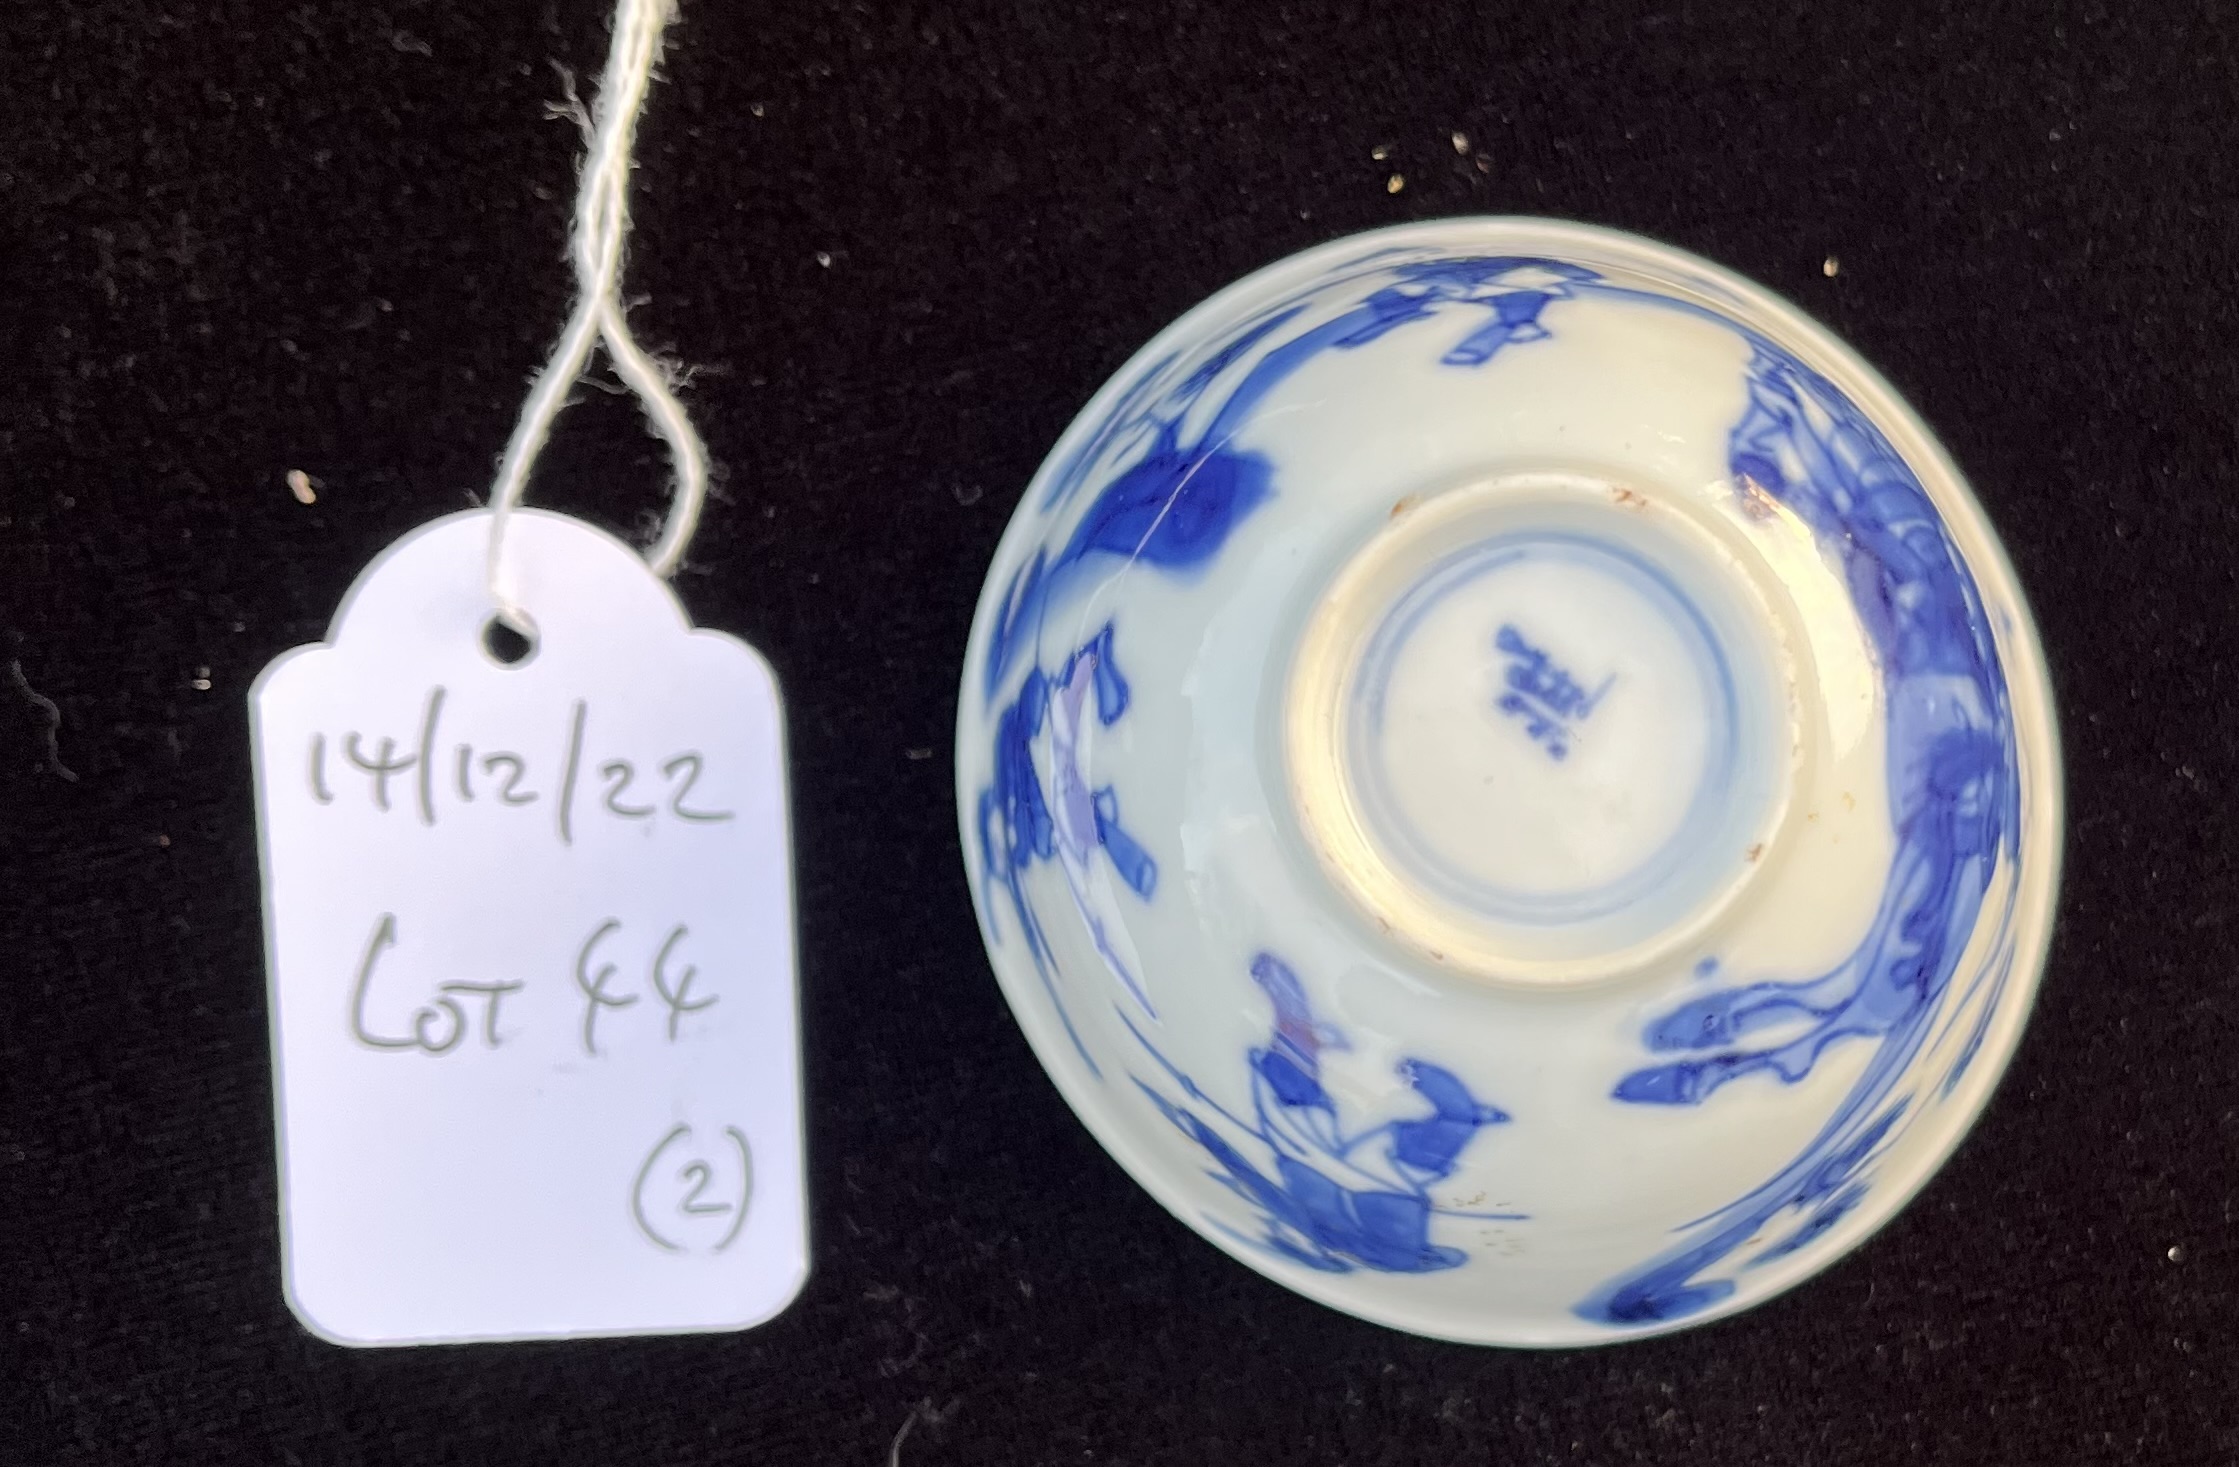 A CHINESE BLUE AND WHITE PORCELAIN TEA BOWL AND SAUCER, QING DYNASTY, KANGXI PERIOD, 1662 – 1722 - Image 5 of 7